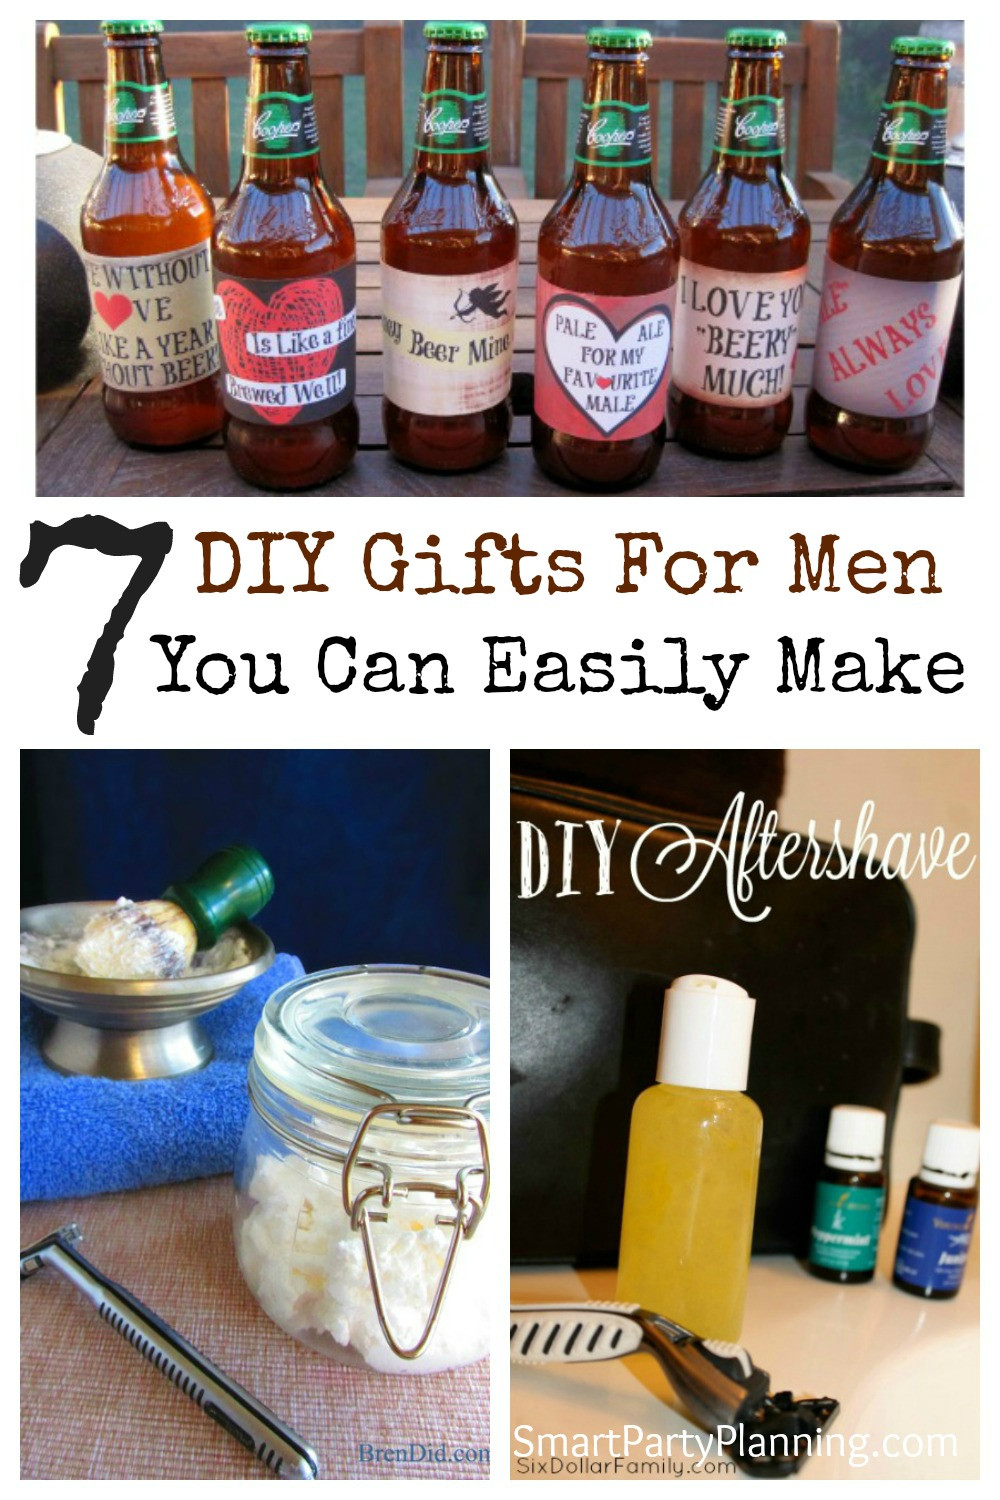 Cool Valentines Gift Ideas For Men
 7 DIY Gifts For Men You Can Easily Make